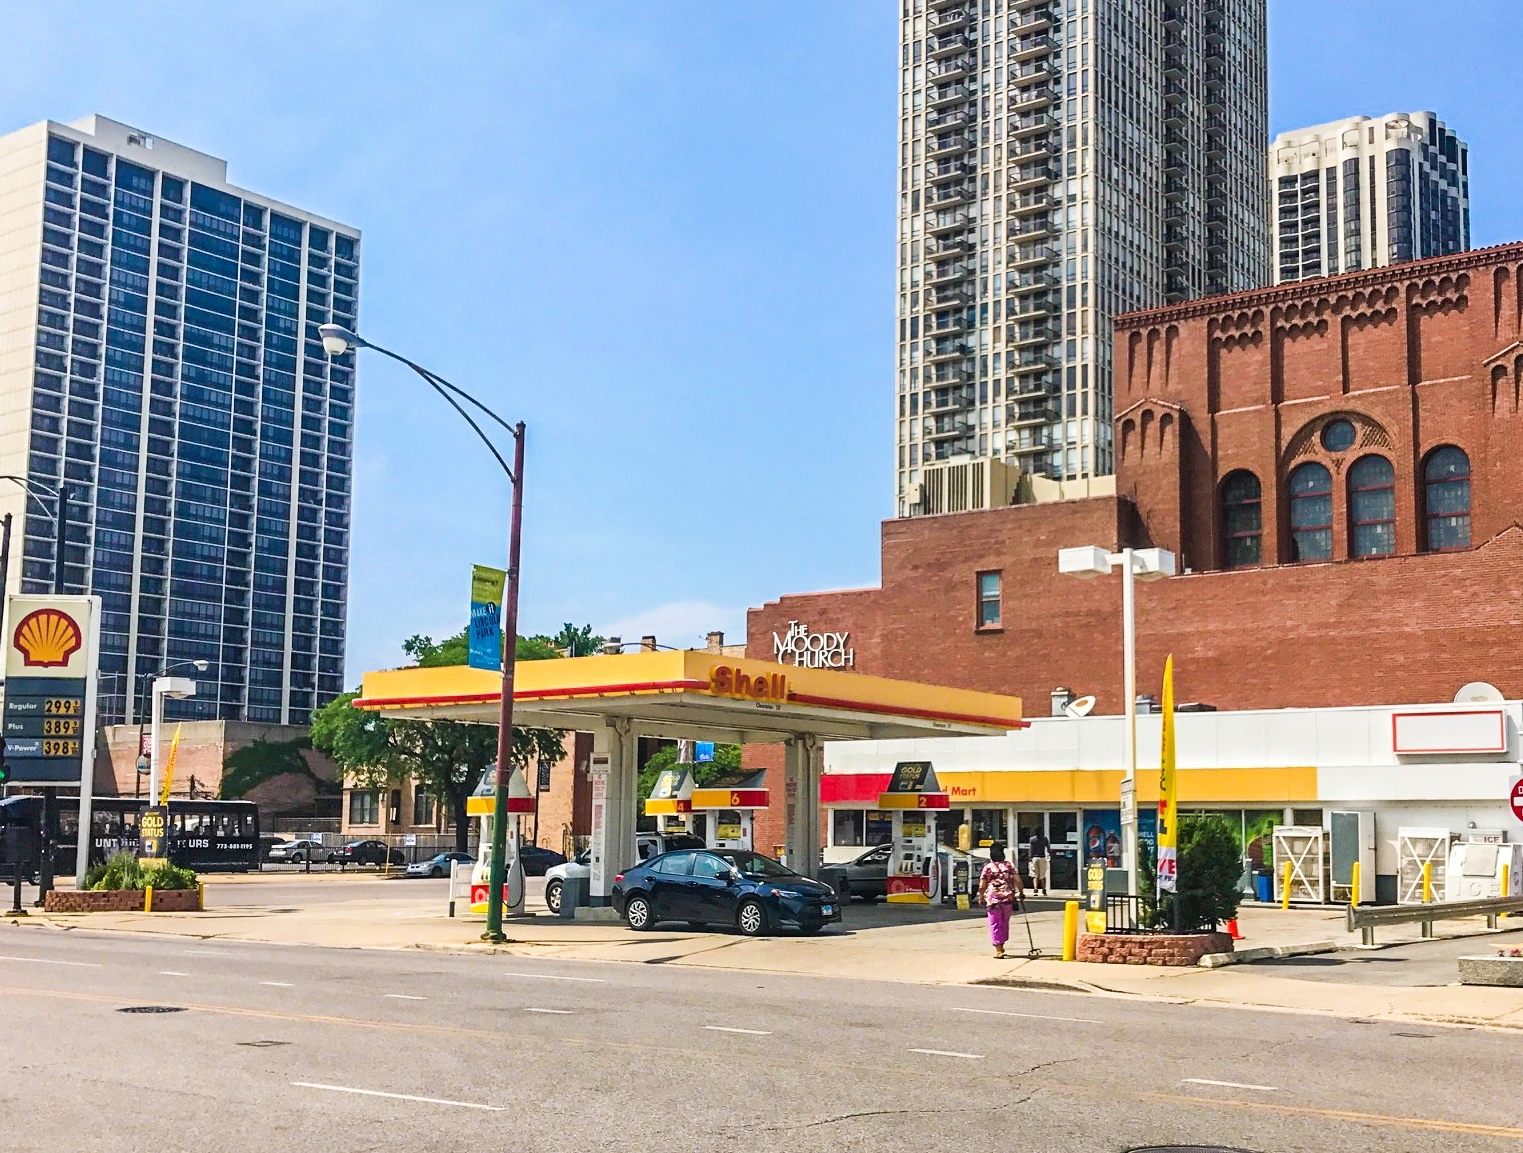 Developer Fern Hill wants to redevelop several properties on Chicago’s North Side, including this gas station at 130 W. North Ave. alongside The Moody Church. (CoStar)